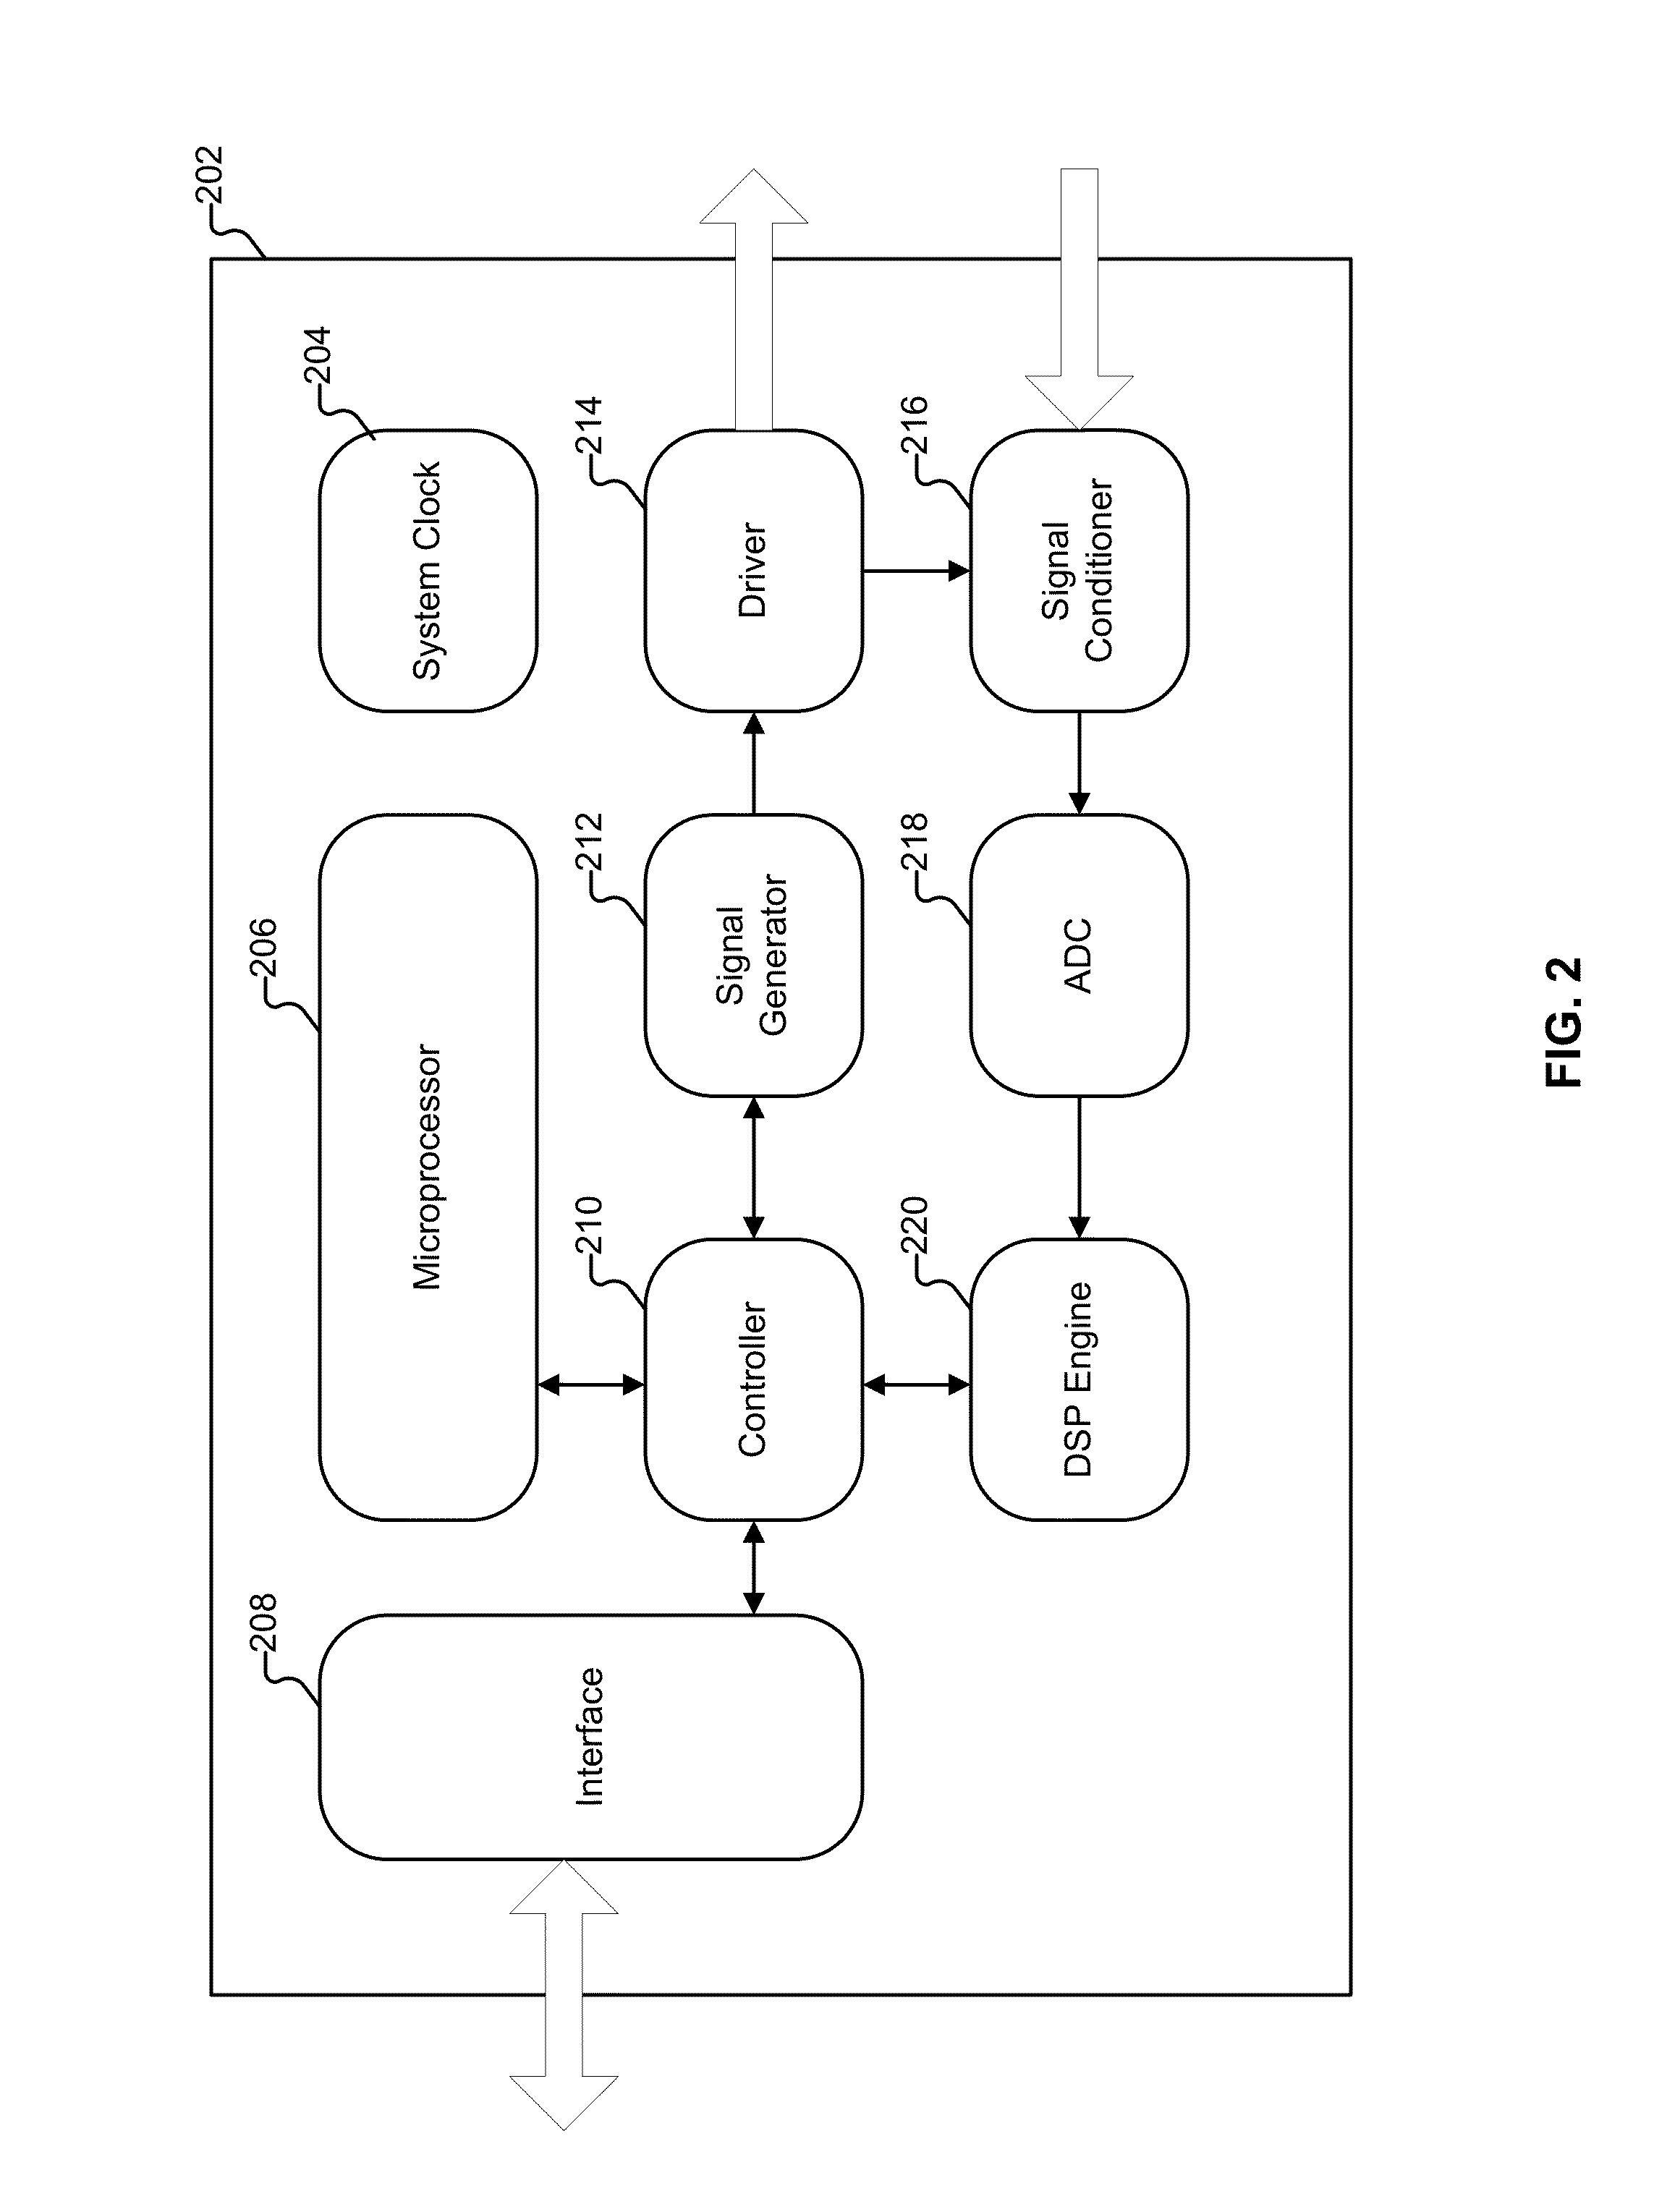 User interface interaction using touch input force